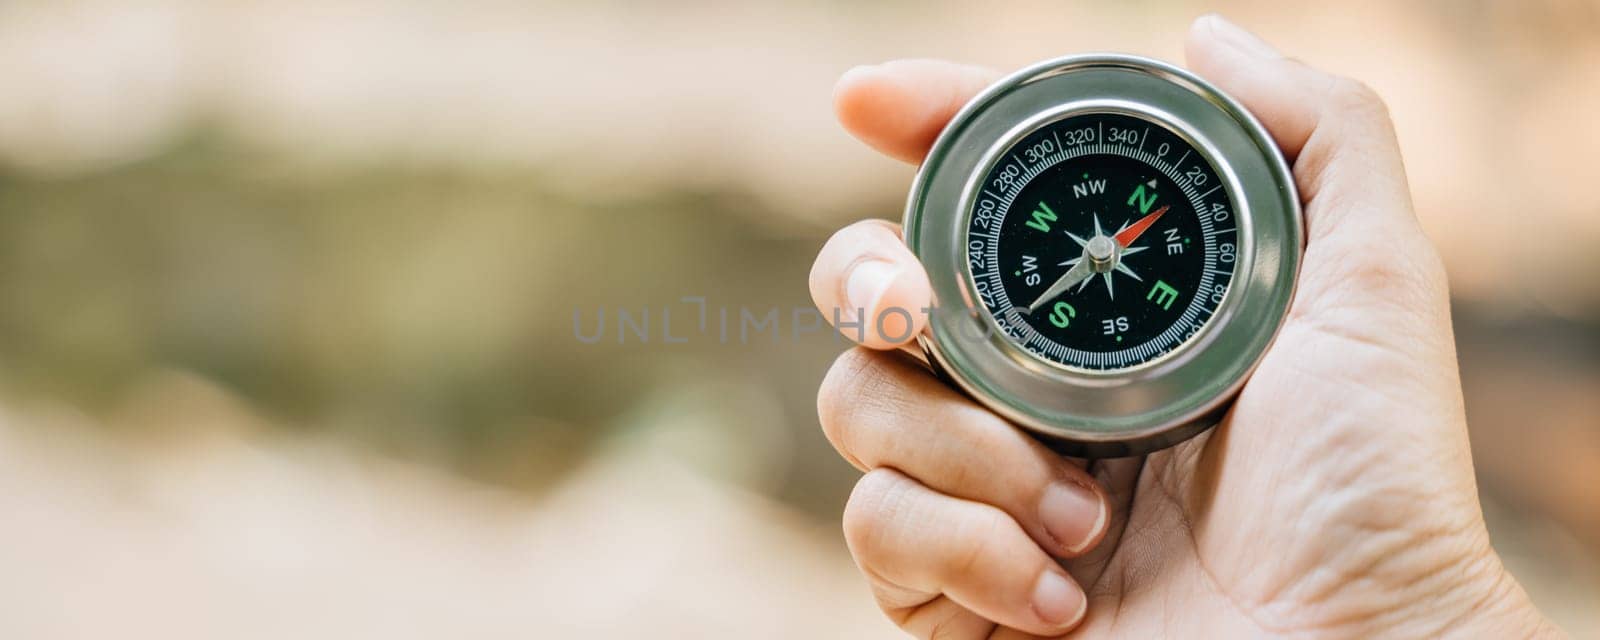 Traveler holds a compass in park seeking guidance amidst the beauty of nature. The compass in her hand symbolizes exploration and her journey to find direction in the forest captivating surroundings.